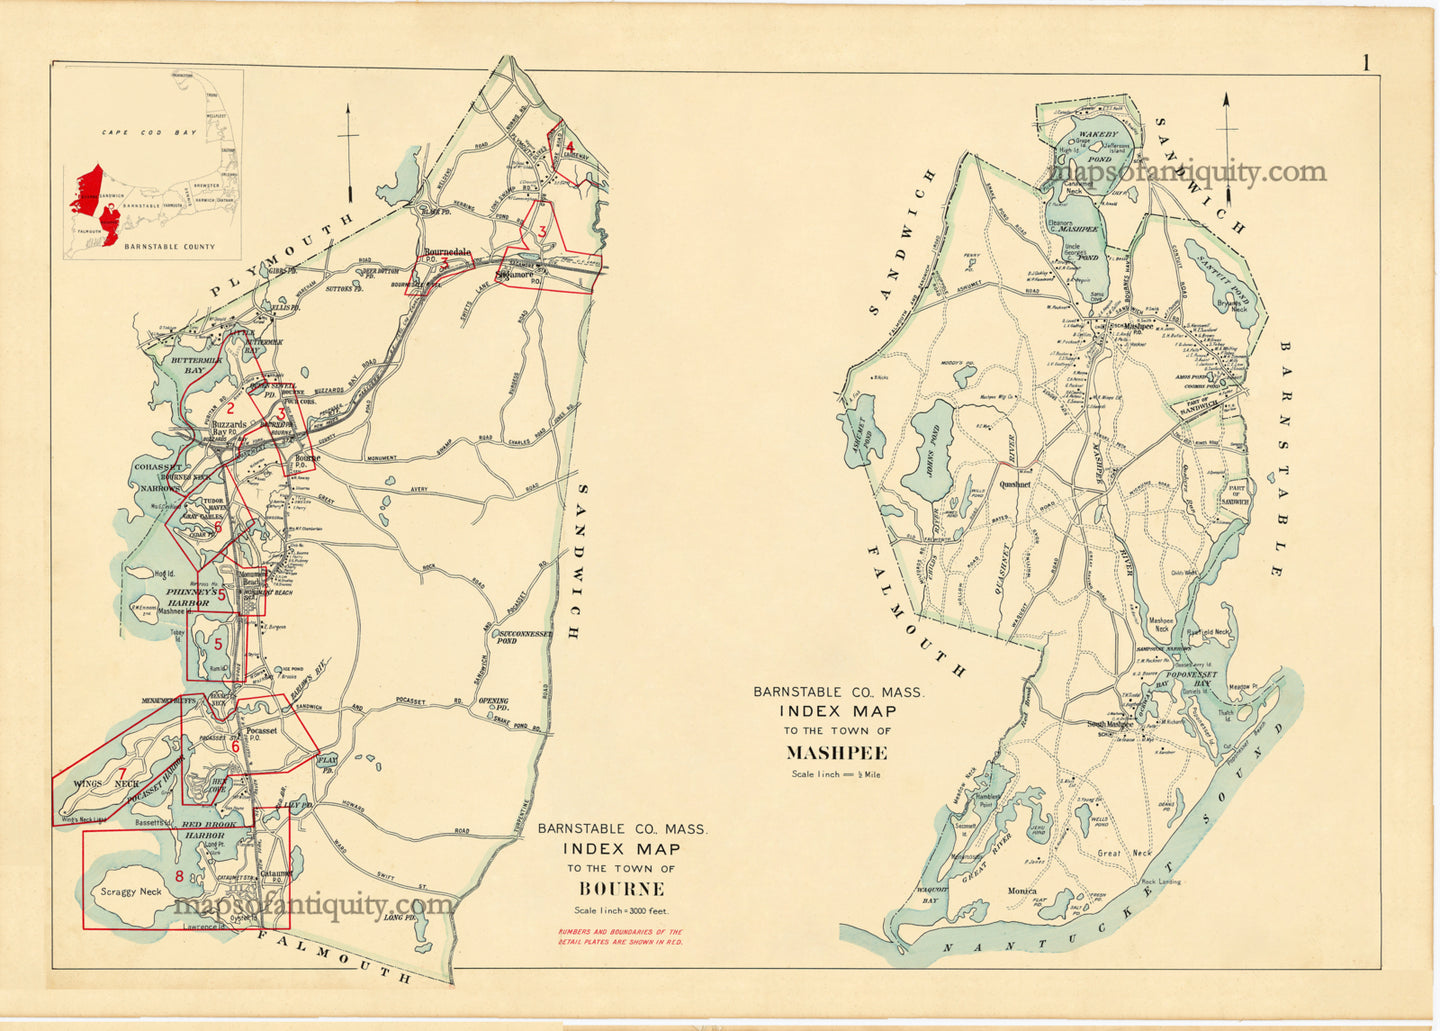 Reproduction-Town-of-Mashpee-p.-1---Town-and-Village-Maps-Atlas-of-Barnstable-County-Walker-1906.----Reproduction---Reproductions-Cape-Cod-and-Islands-Reproduction--Maps-Of-Antiquity